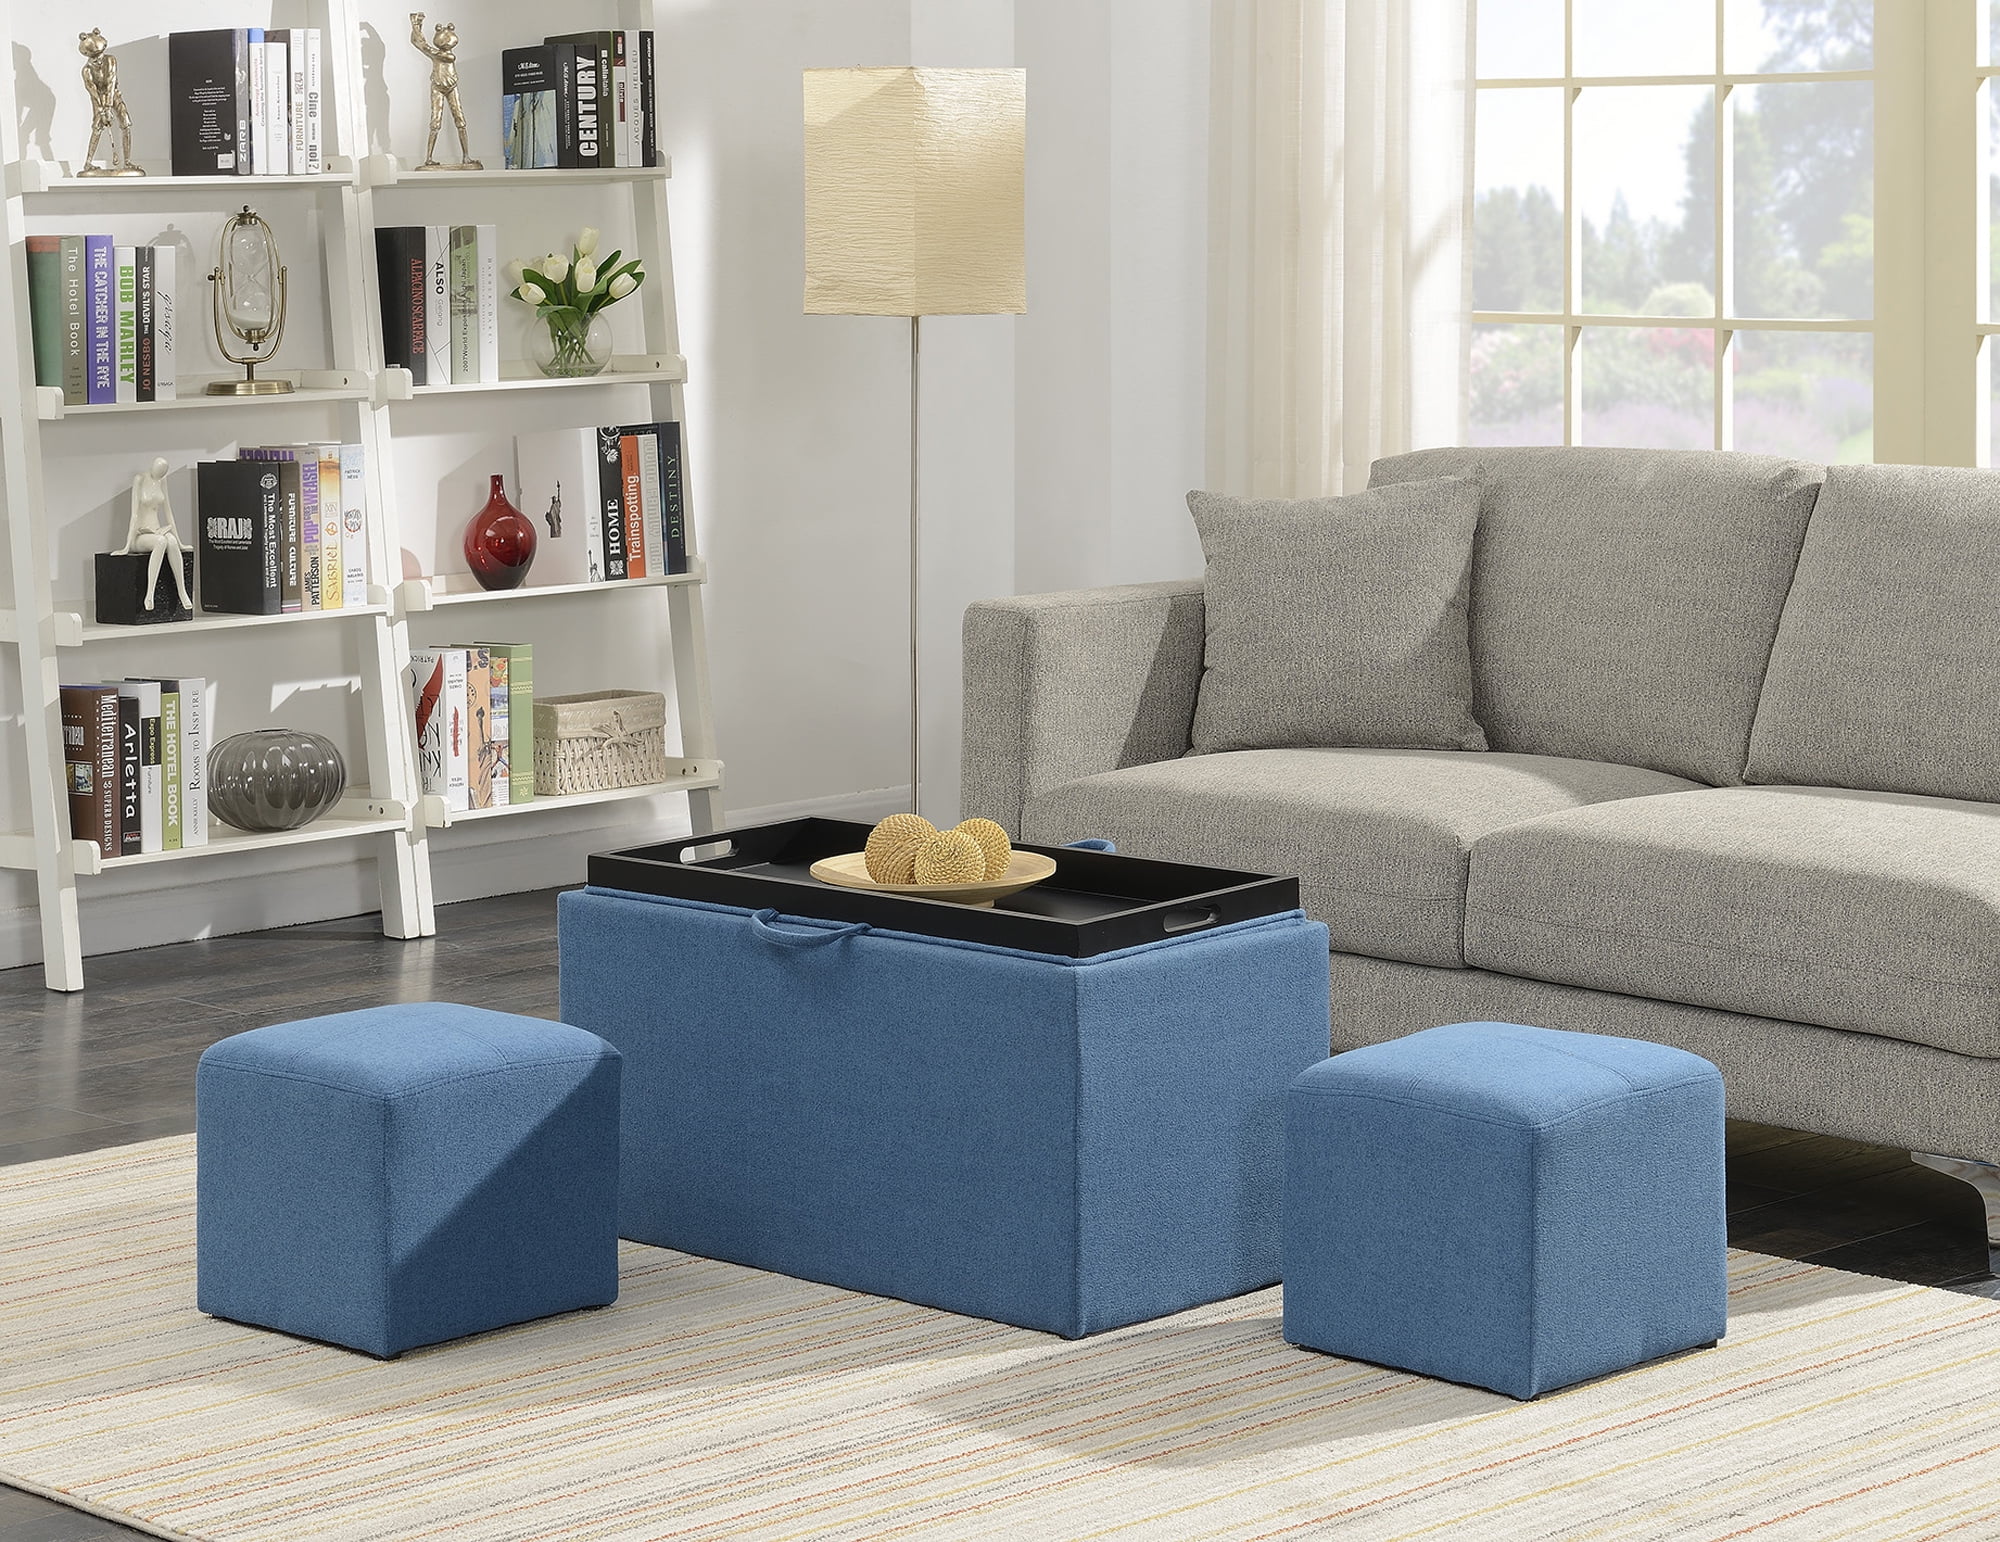 Picture of Convenience Concepts 143012FSBE Designs 4Comfort Sheridan Storage Bench with 2 Side Ottomans, Soft Blue Fabric